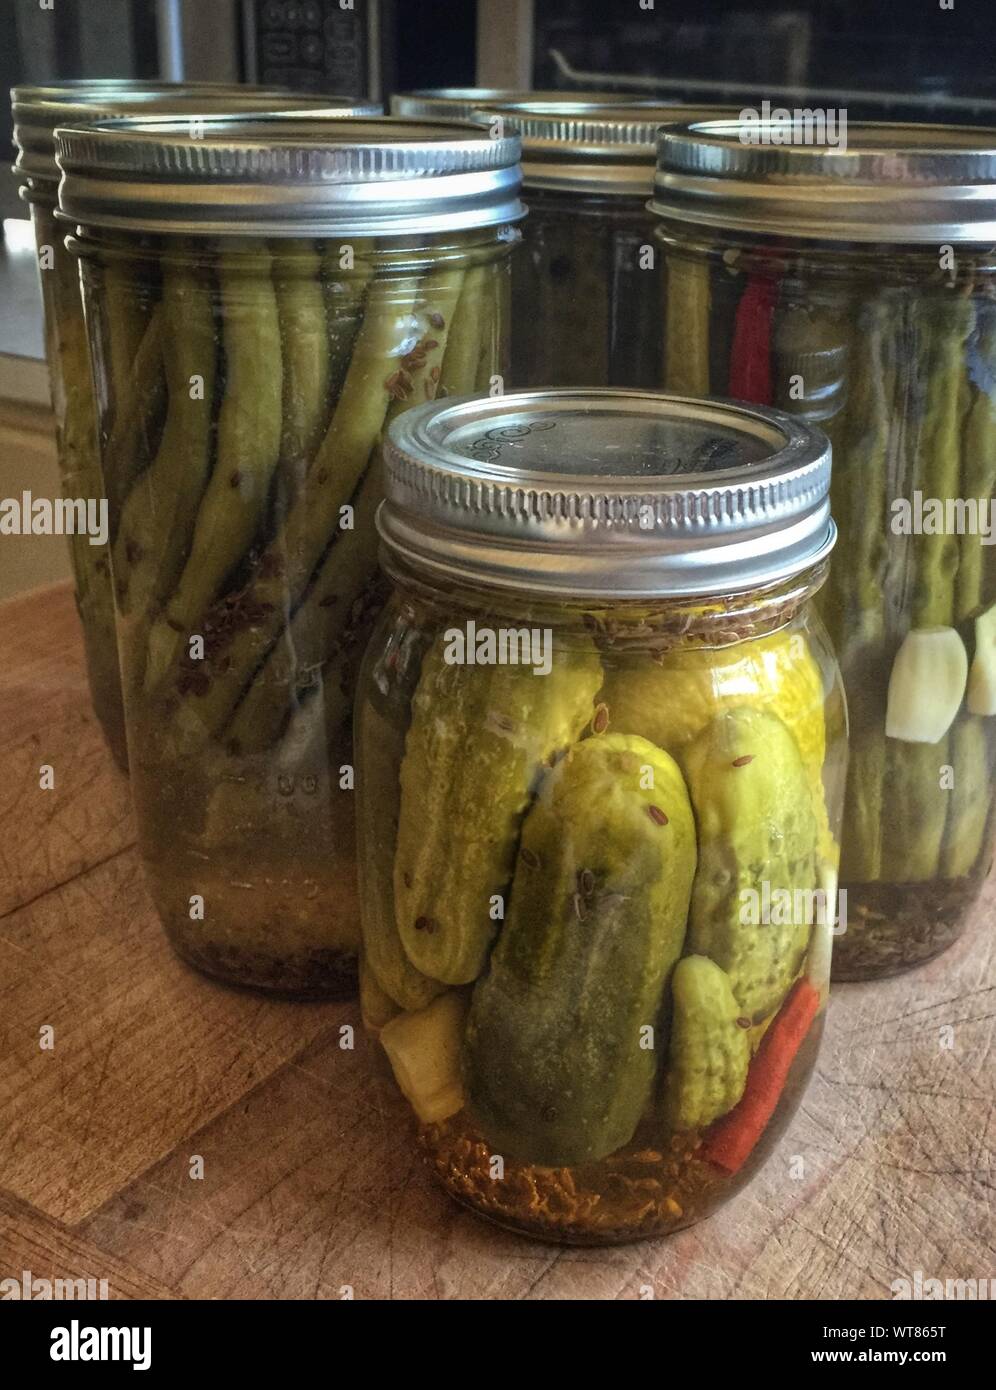 Pickles In Glass Jars On Table At Home Stock Photo